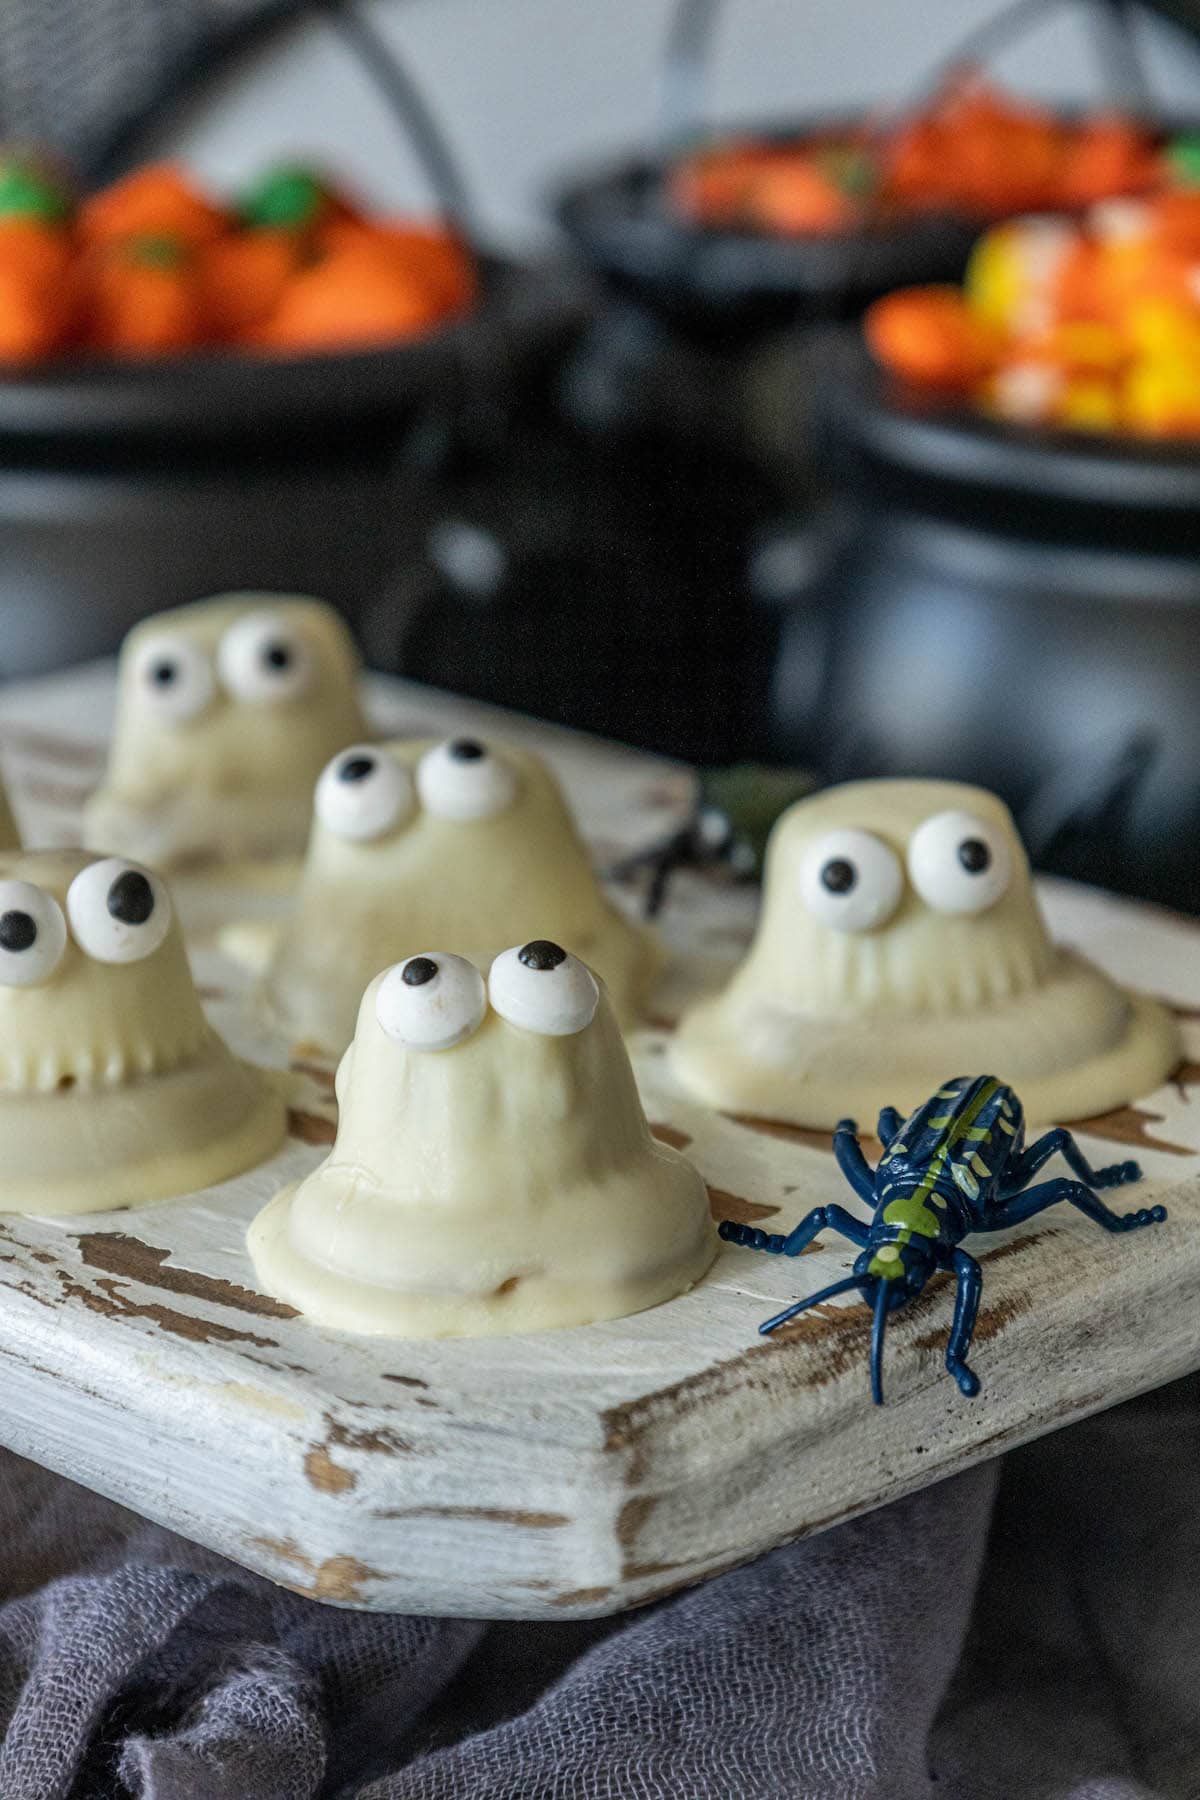 picture of cookies dipped in white chocolate with candy eyes to look like ghosts